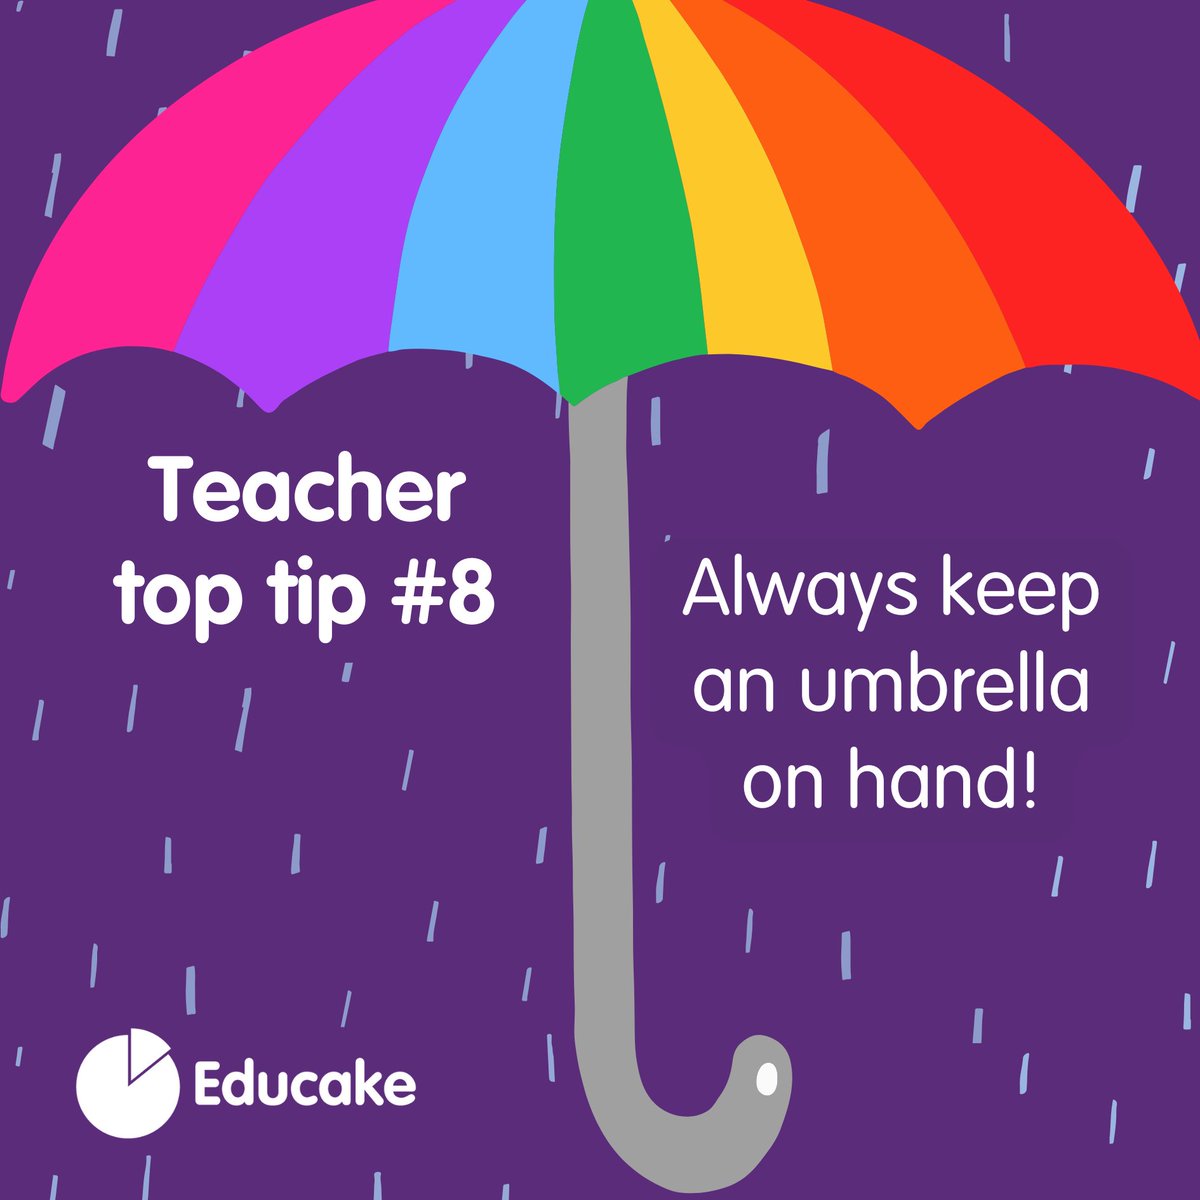 What's your most useful item when teaching? We'll be posting teacher-submitted suggestions that may make your life just that bit easier. #primaryteacher #teachersoftwitter #SATs #KS2